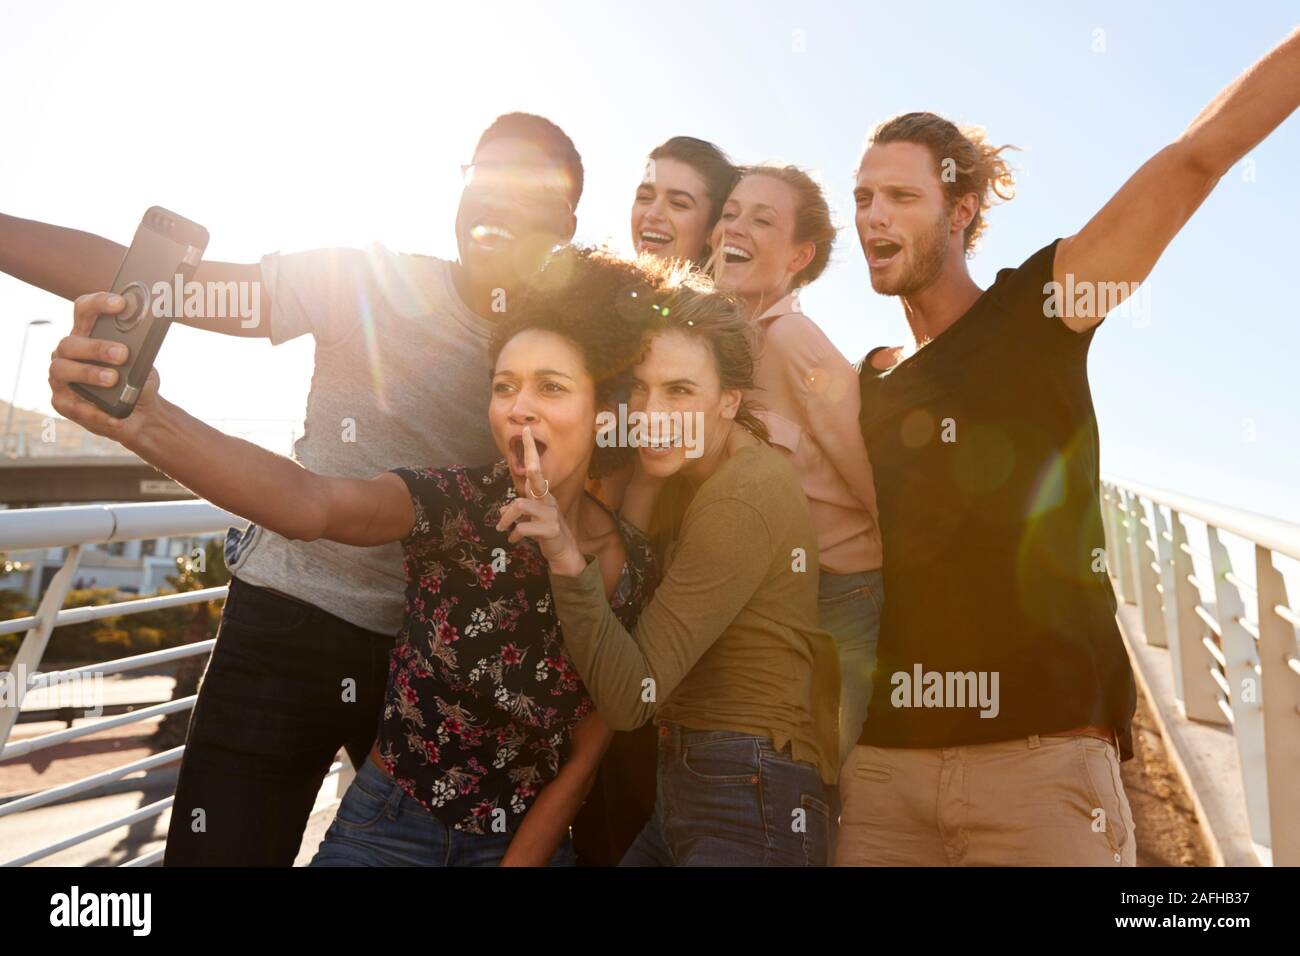 Smiling Young Friends Posing For Selfie On Outdoor Footbridge Together Stock Photo